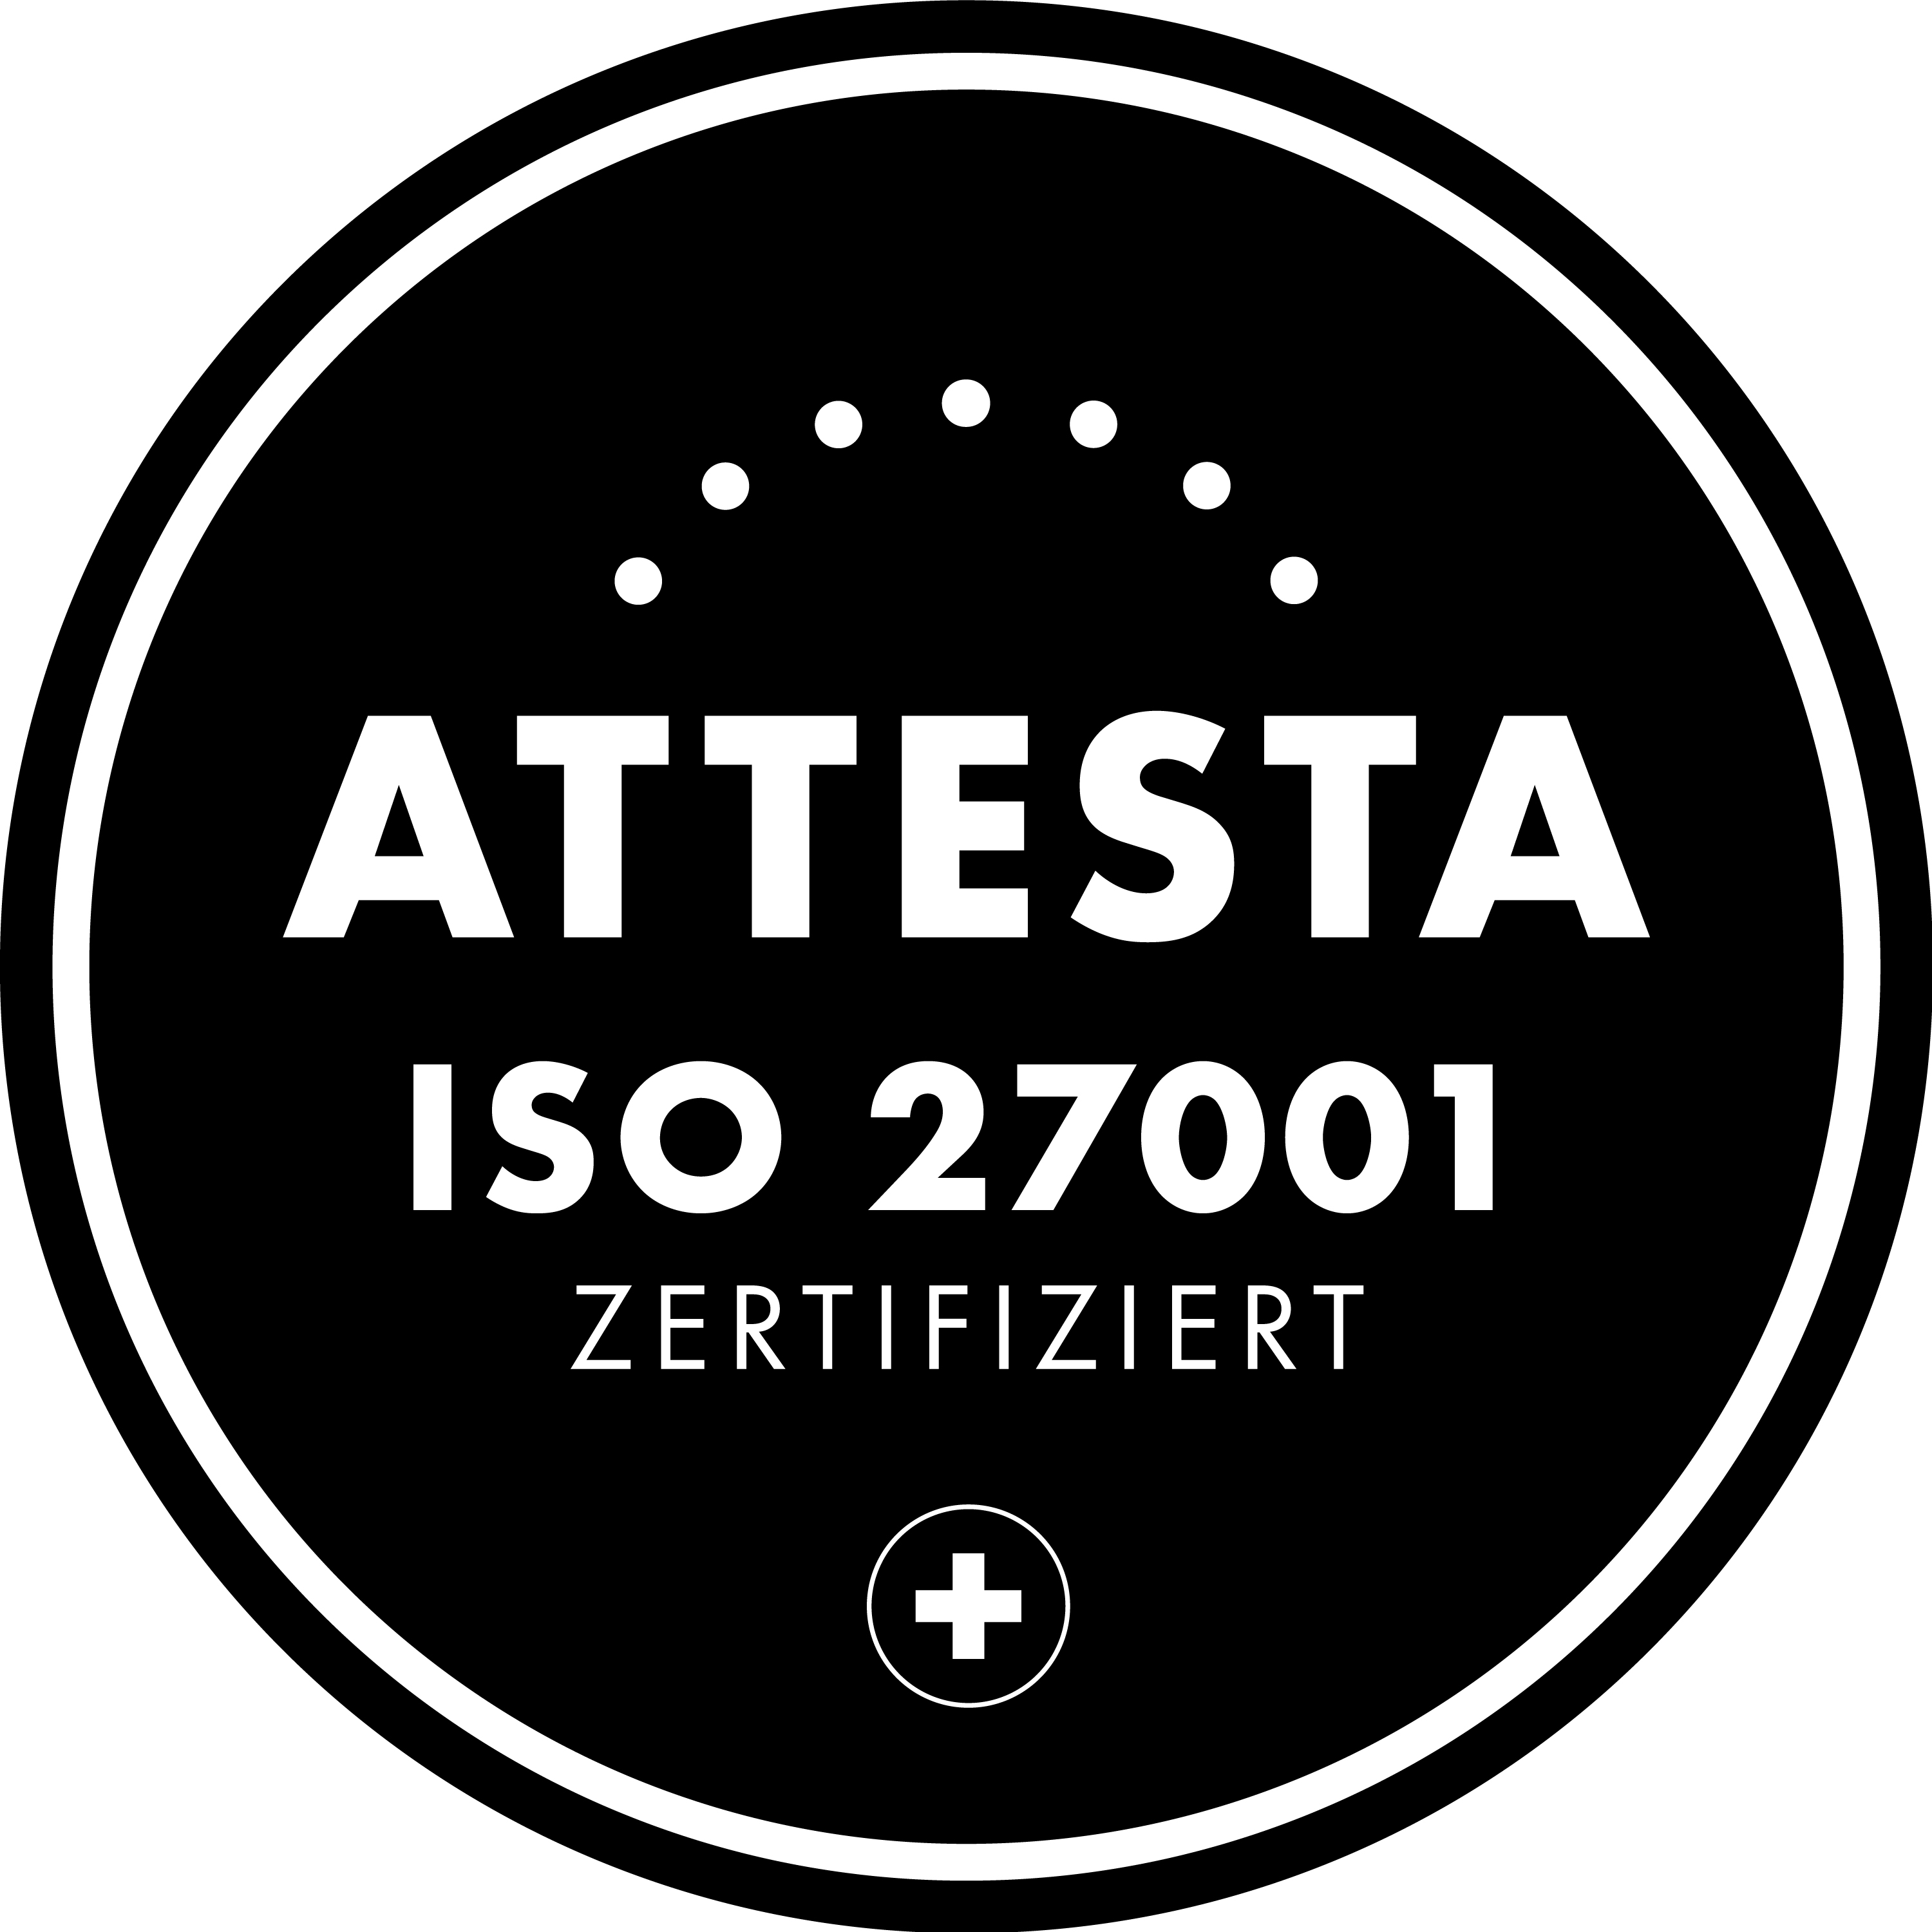 ATTESTA ISO 27001 certified